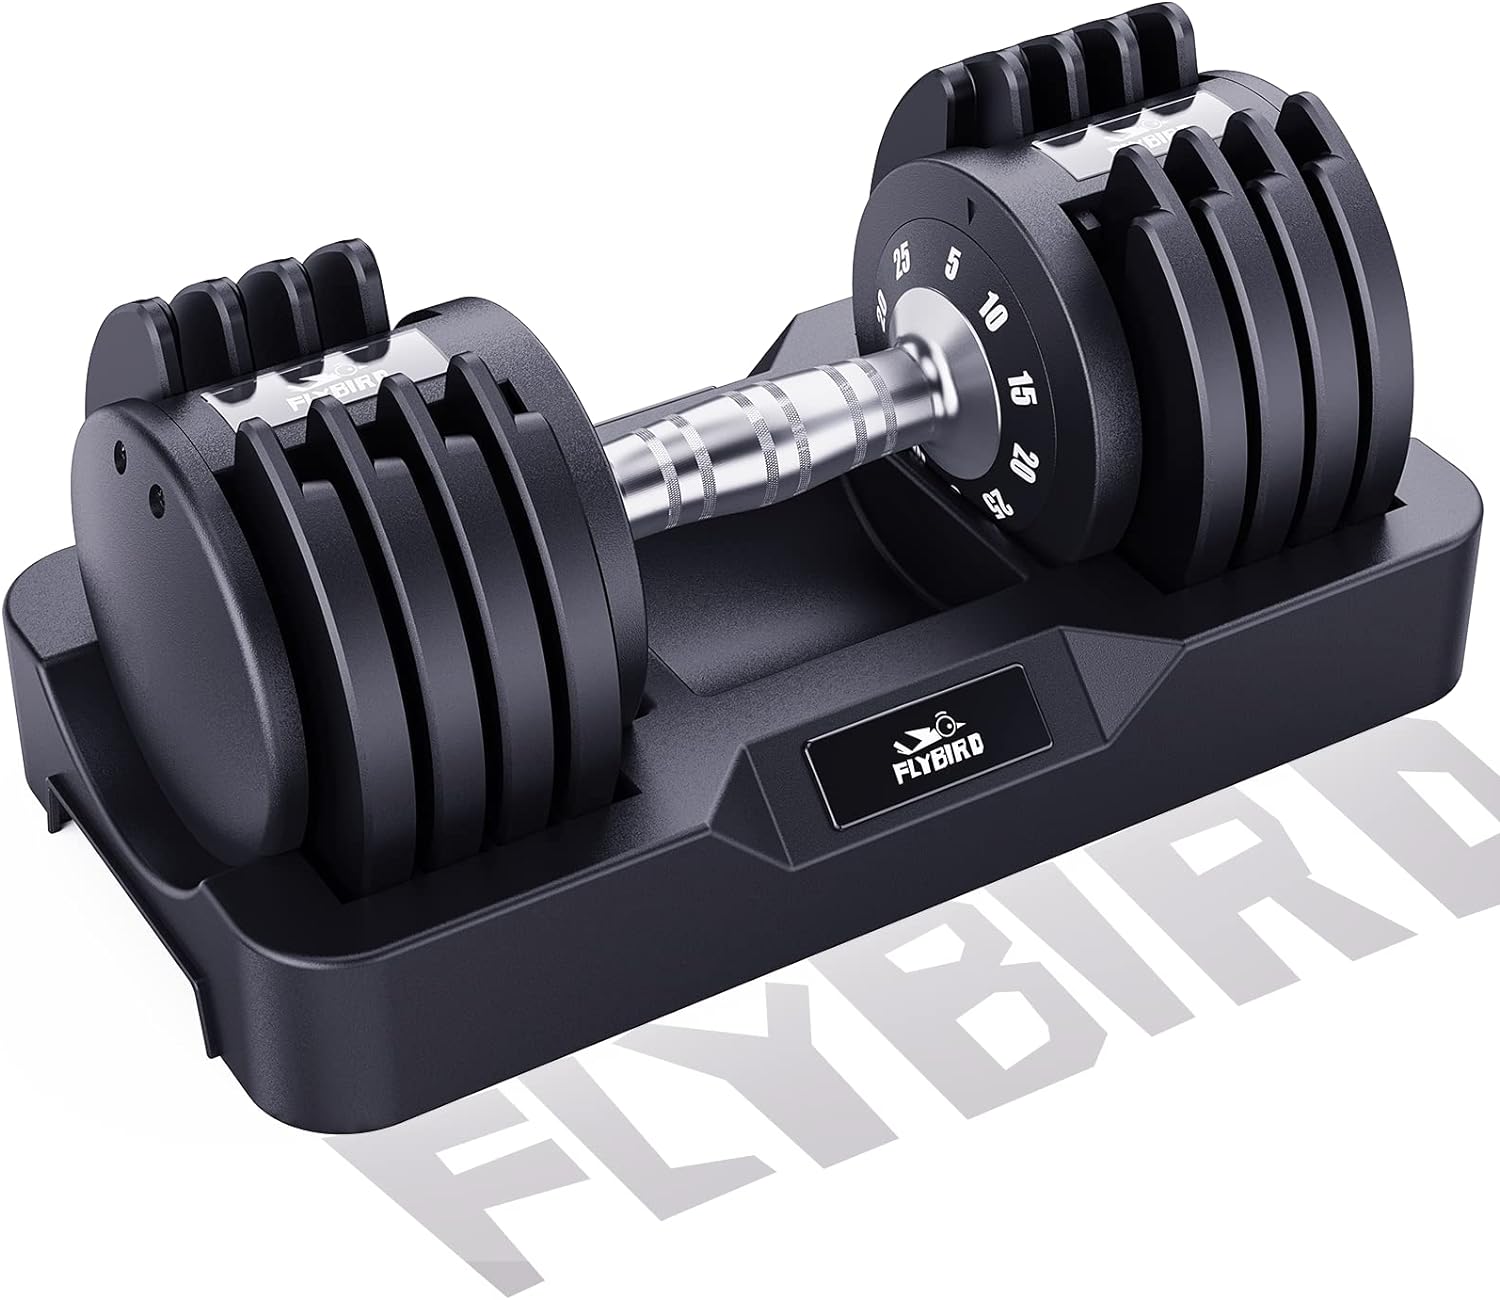 FLYBIRD Adjustable 25LB Single Dumbbell for Men and Women with Anti-Slip Metal Fast Adjust Weight by Turning Handle,Black Dumbbell with Tray Suitable for Full Body Workout Fitness